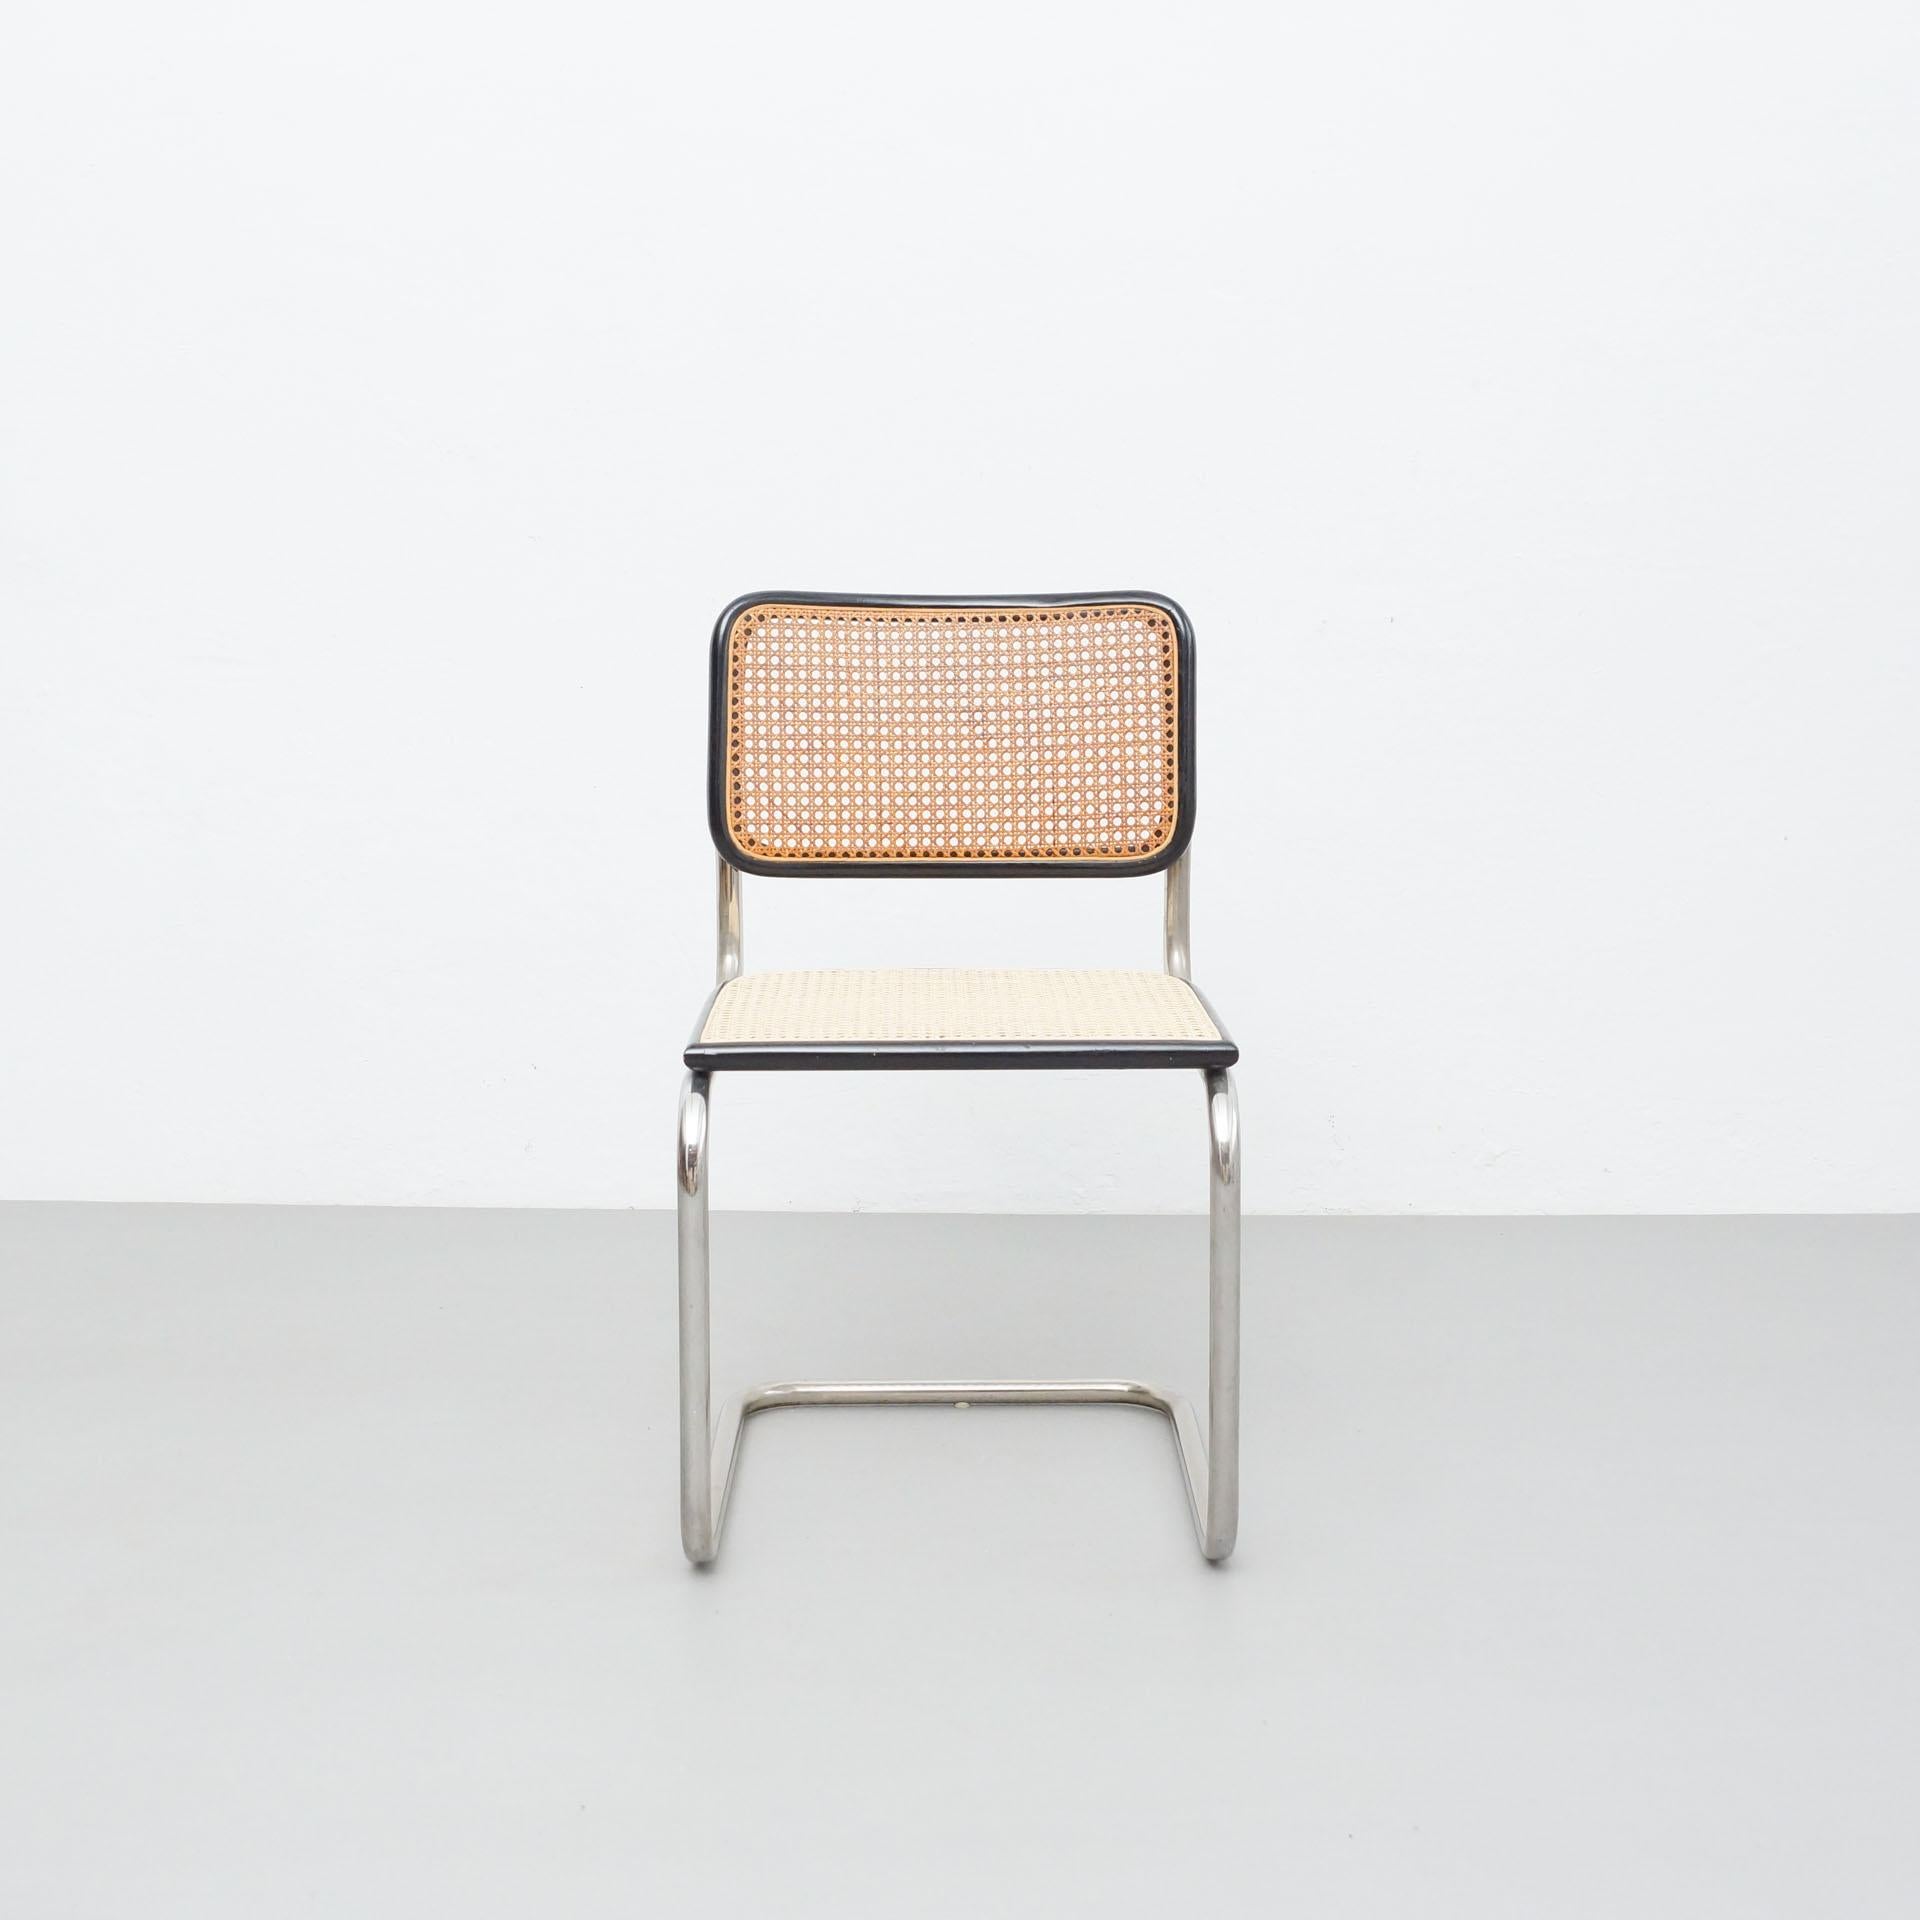 Chair designed in the style of Marcel Breuer, by unknown manufacturer from France.

In original condition, with minor wear consistent with age and use, preserving a beautiful patina.

Materials:
Wood
Rattan
Steel

Dimensions:
 D 54 cm x W